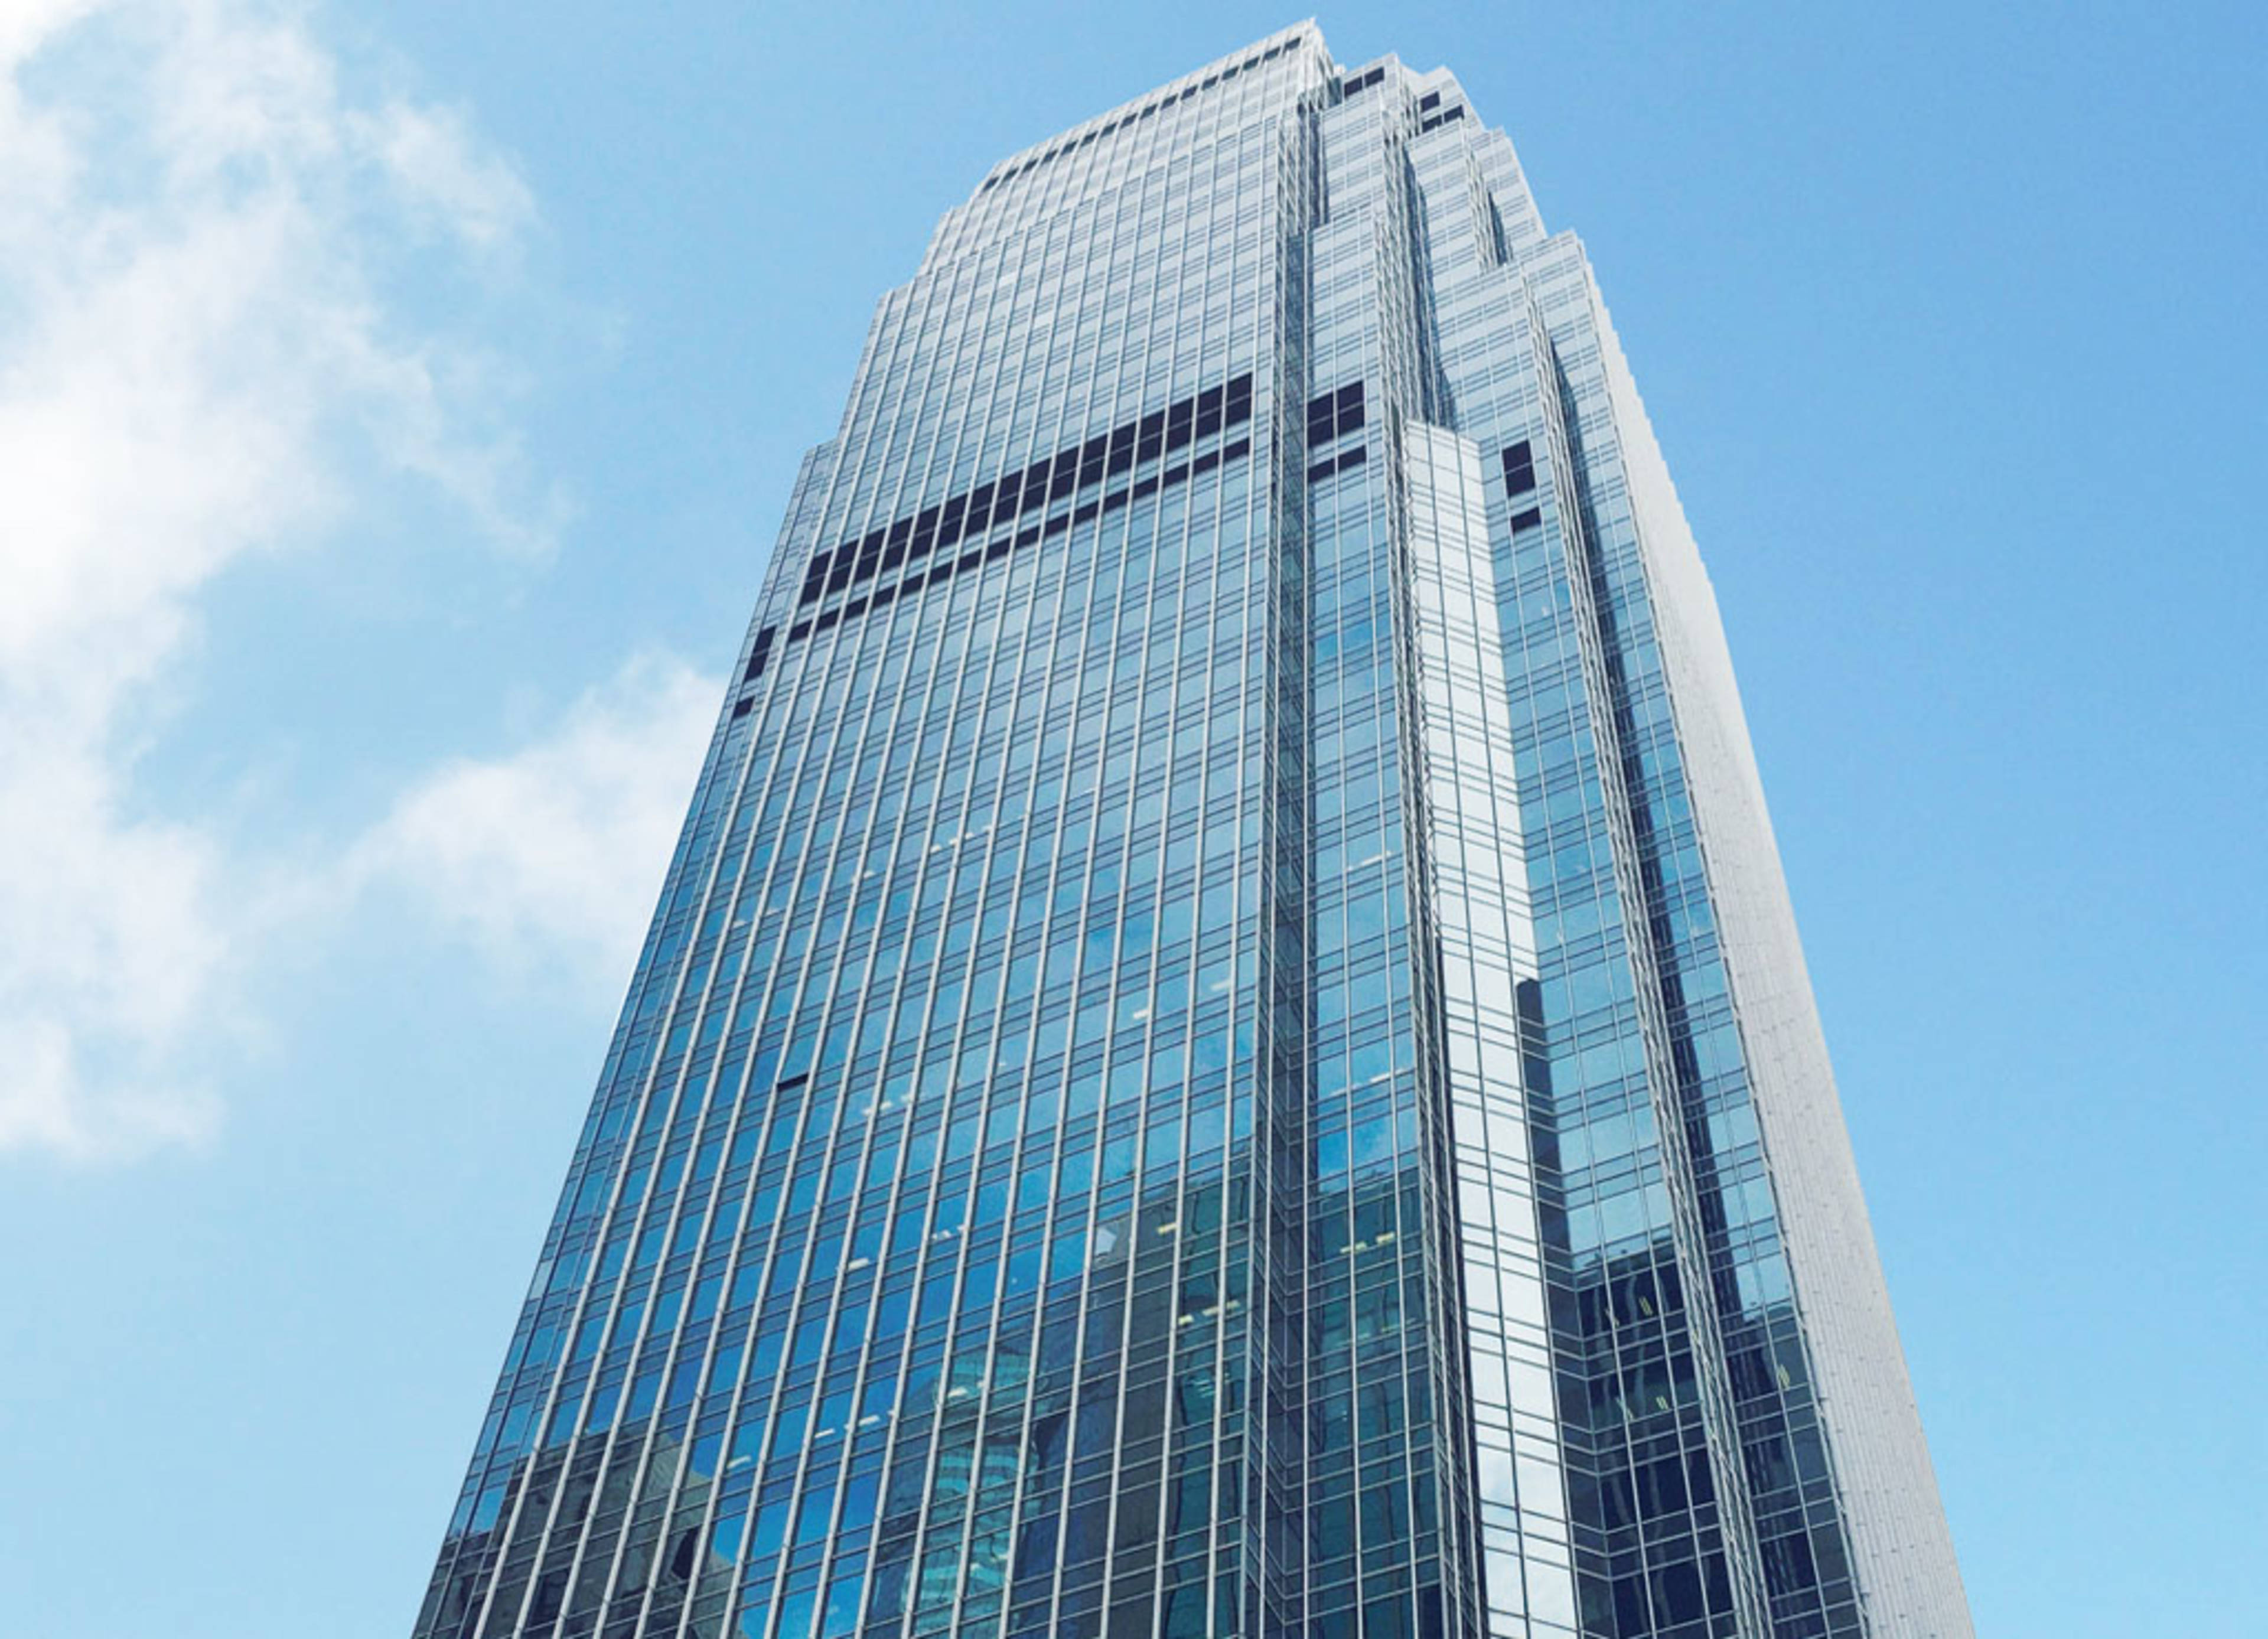 Level 20, One ifc, 1 Harbour View Street, Central, Hong Kong